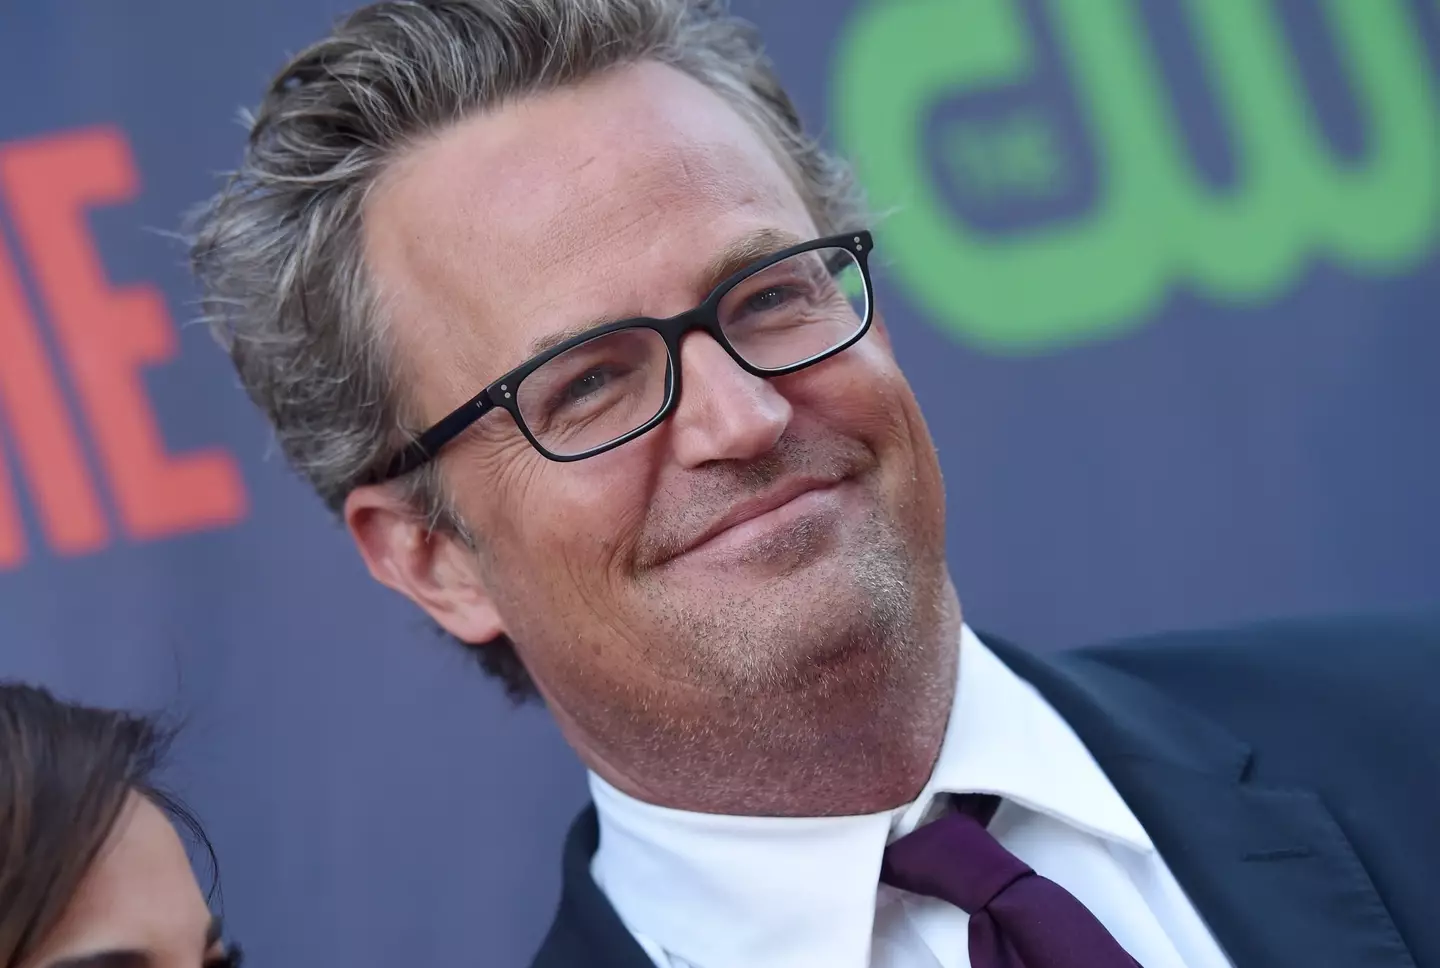 Matthew Perry was just 54 at the time of his death.